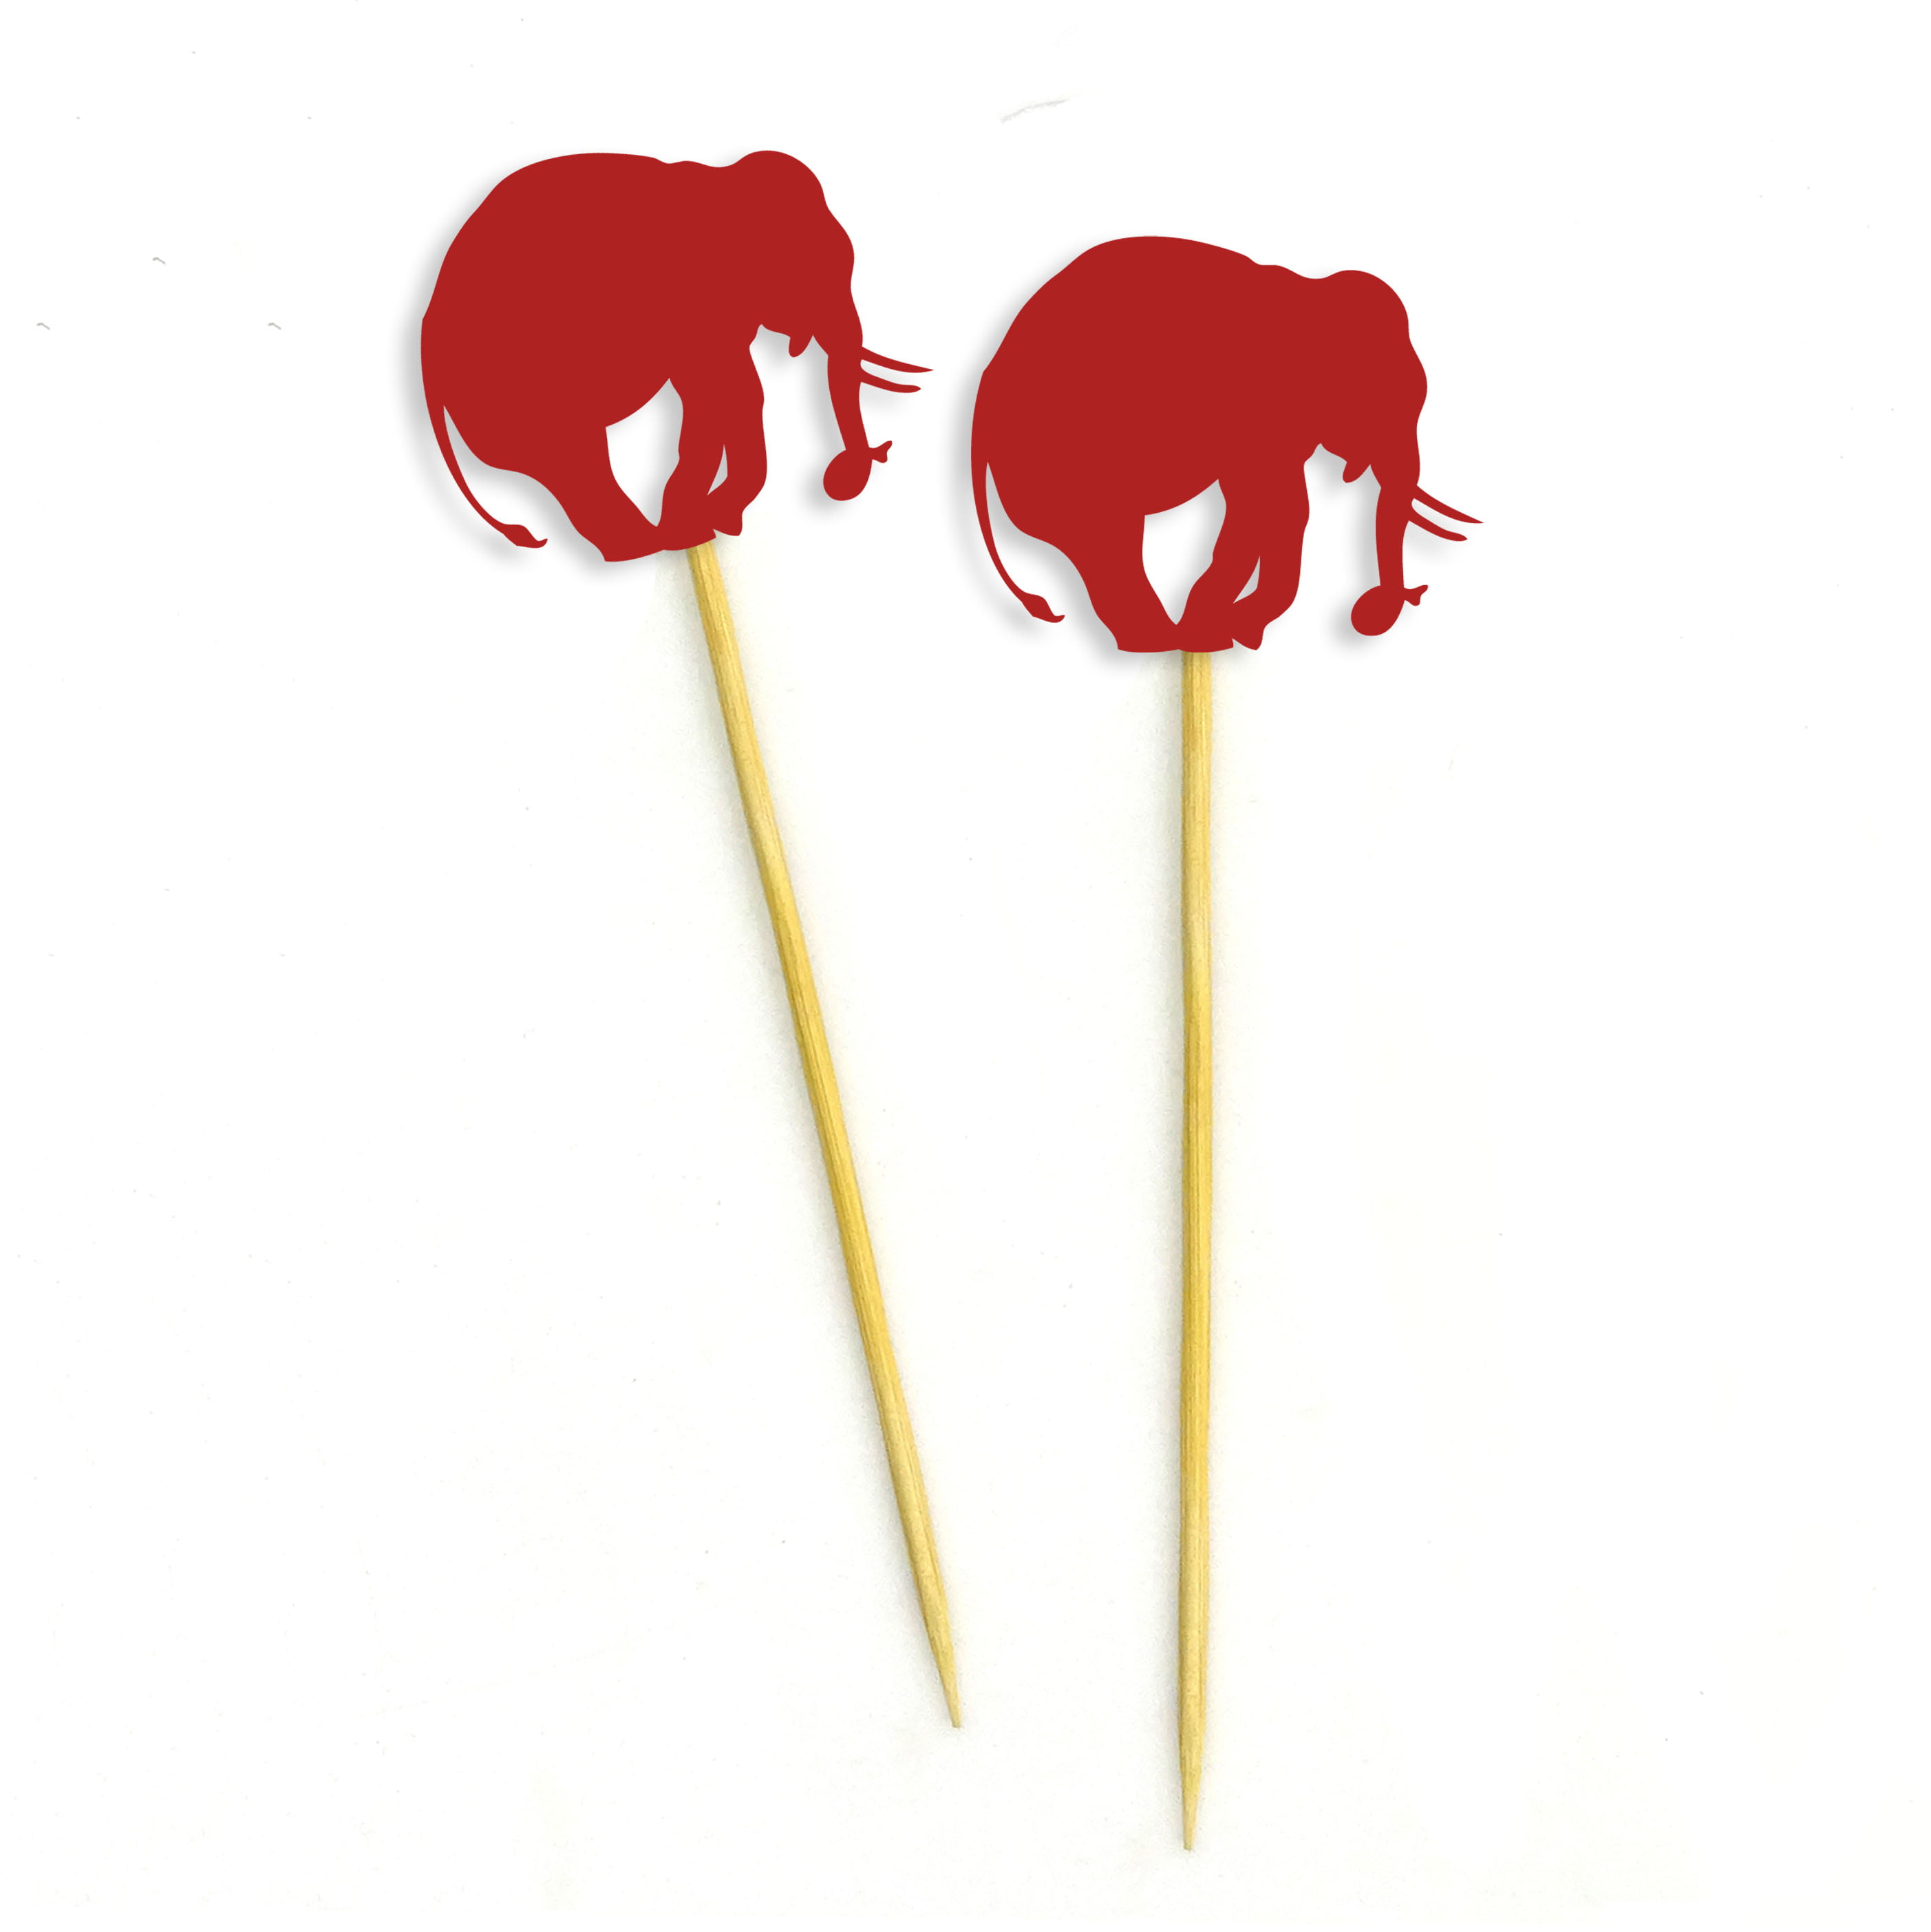 Details about   Darling Souvenir Birthday/ Baby Shower-KrV Elephant Cupcake Toppers 